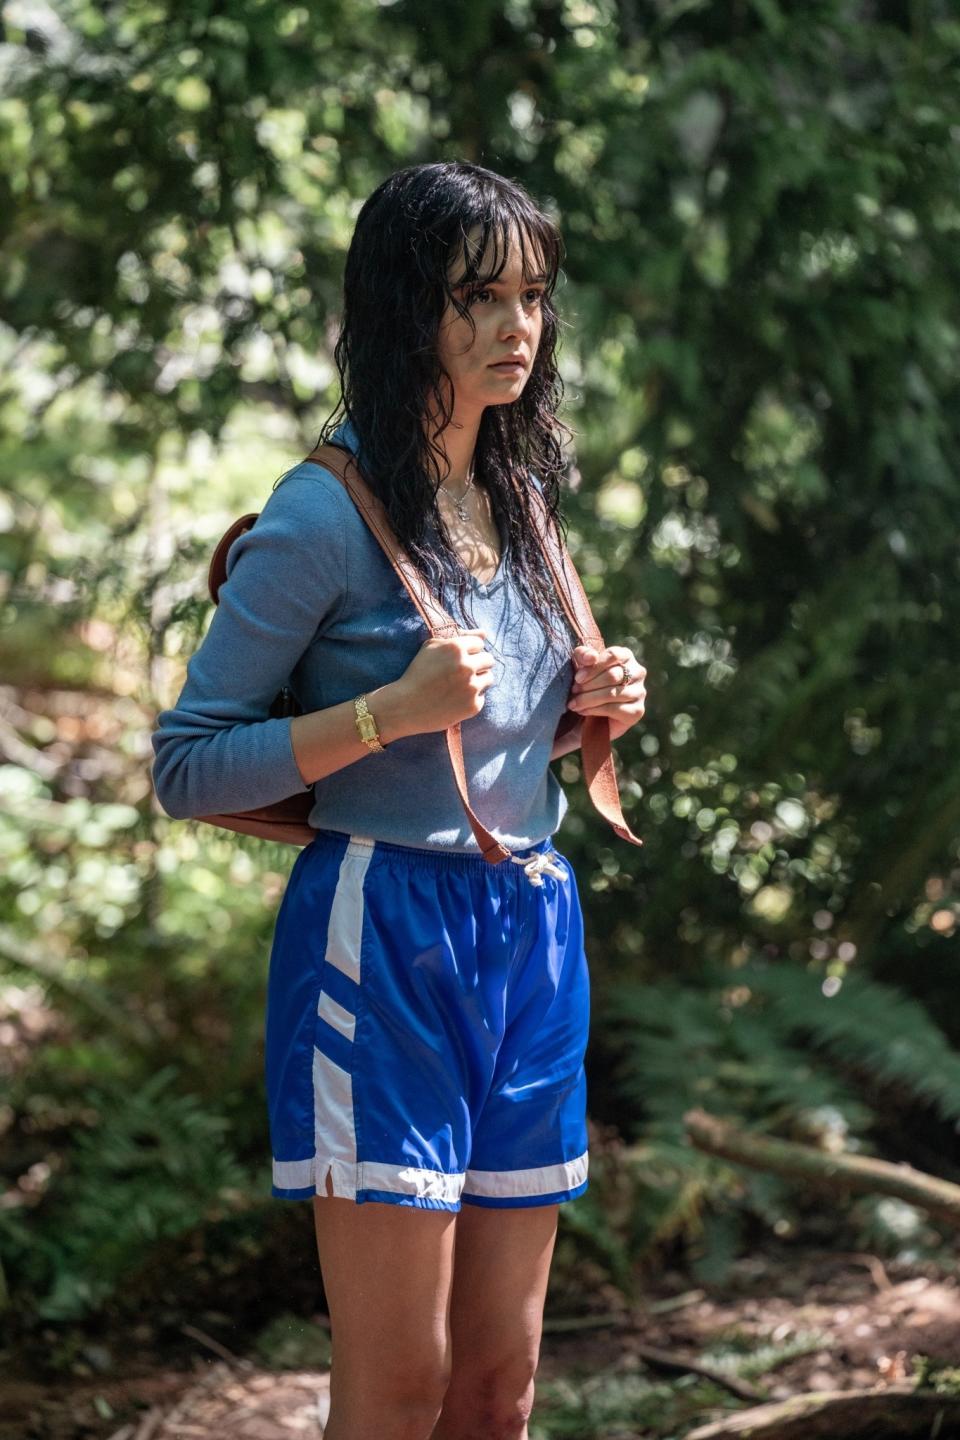 Woman in casual sportswear with a backpack looking concerned in a forest setting